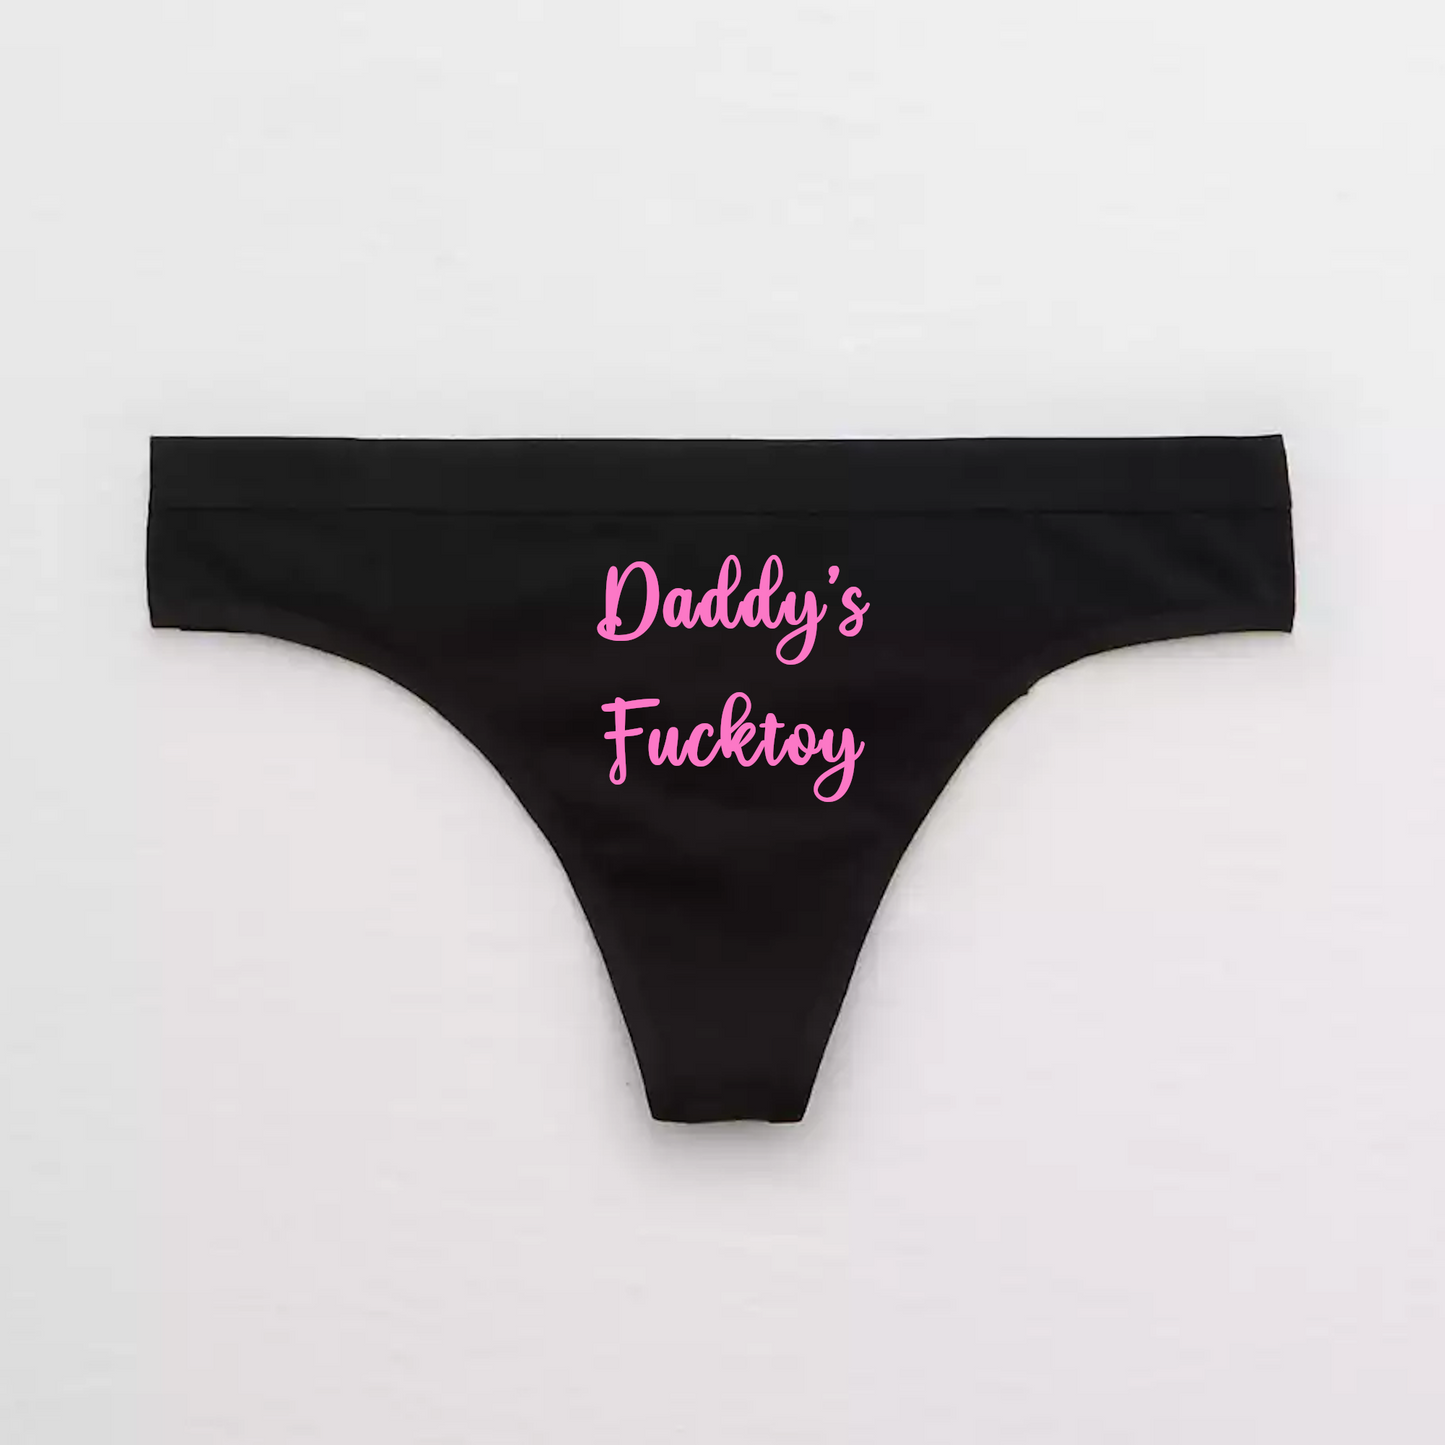 Daddys Fucktoy Panties for DDLG Kink